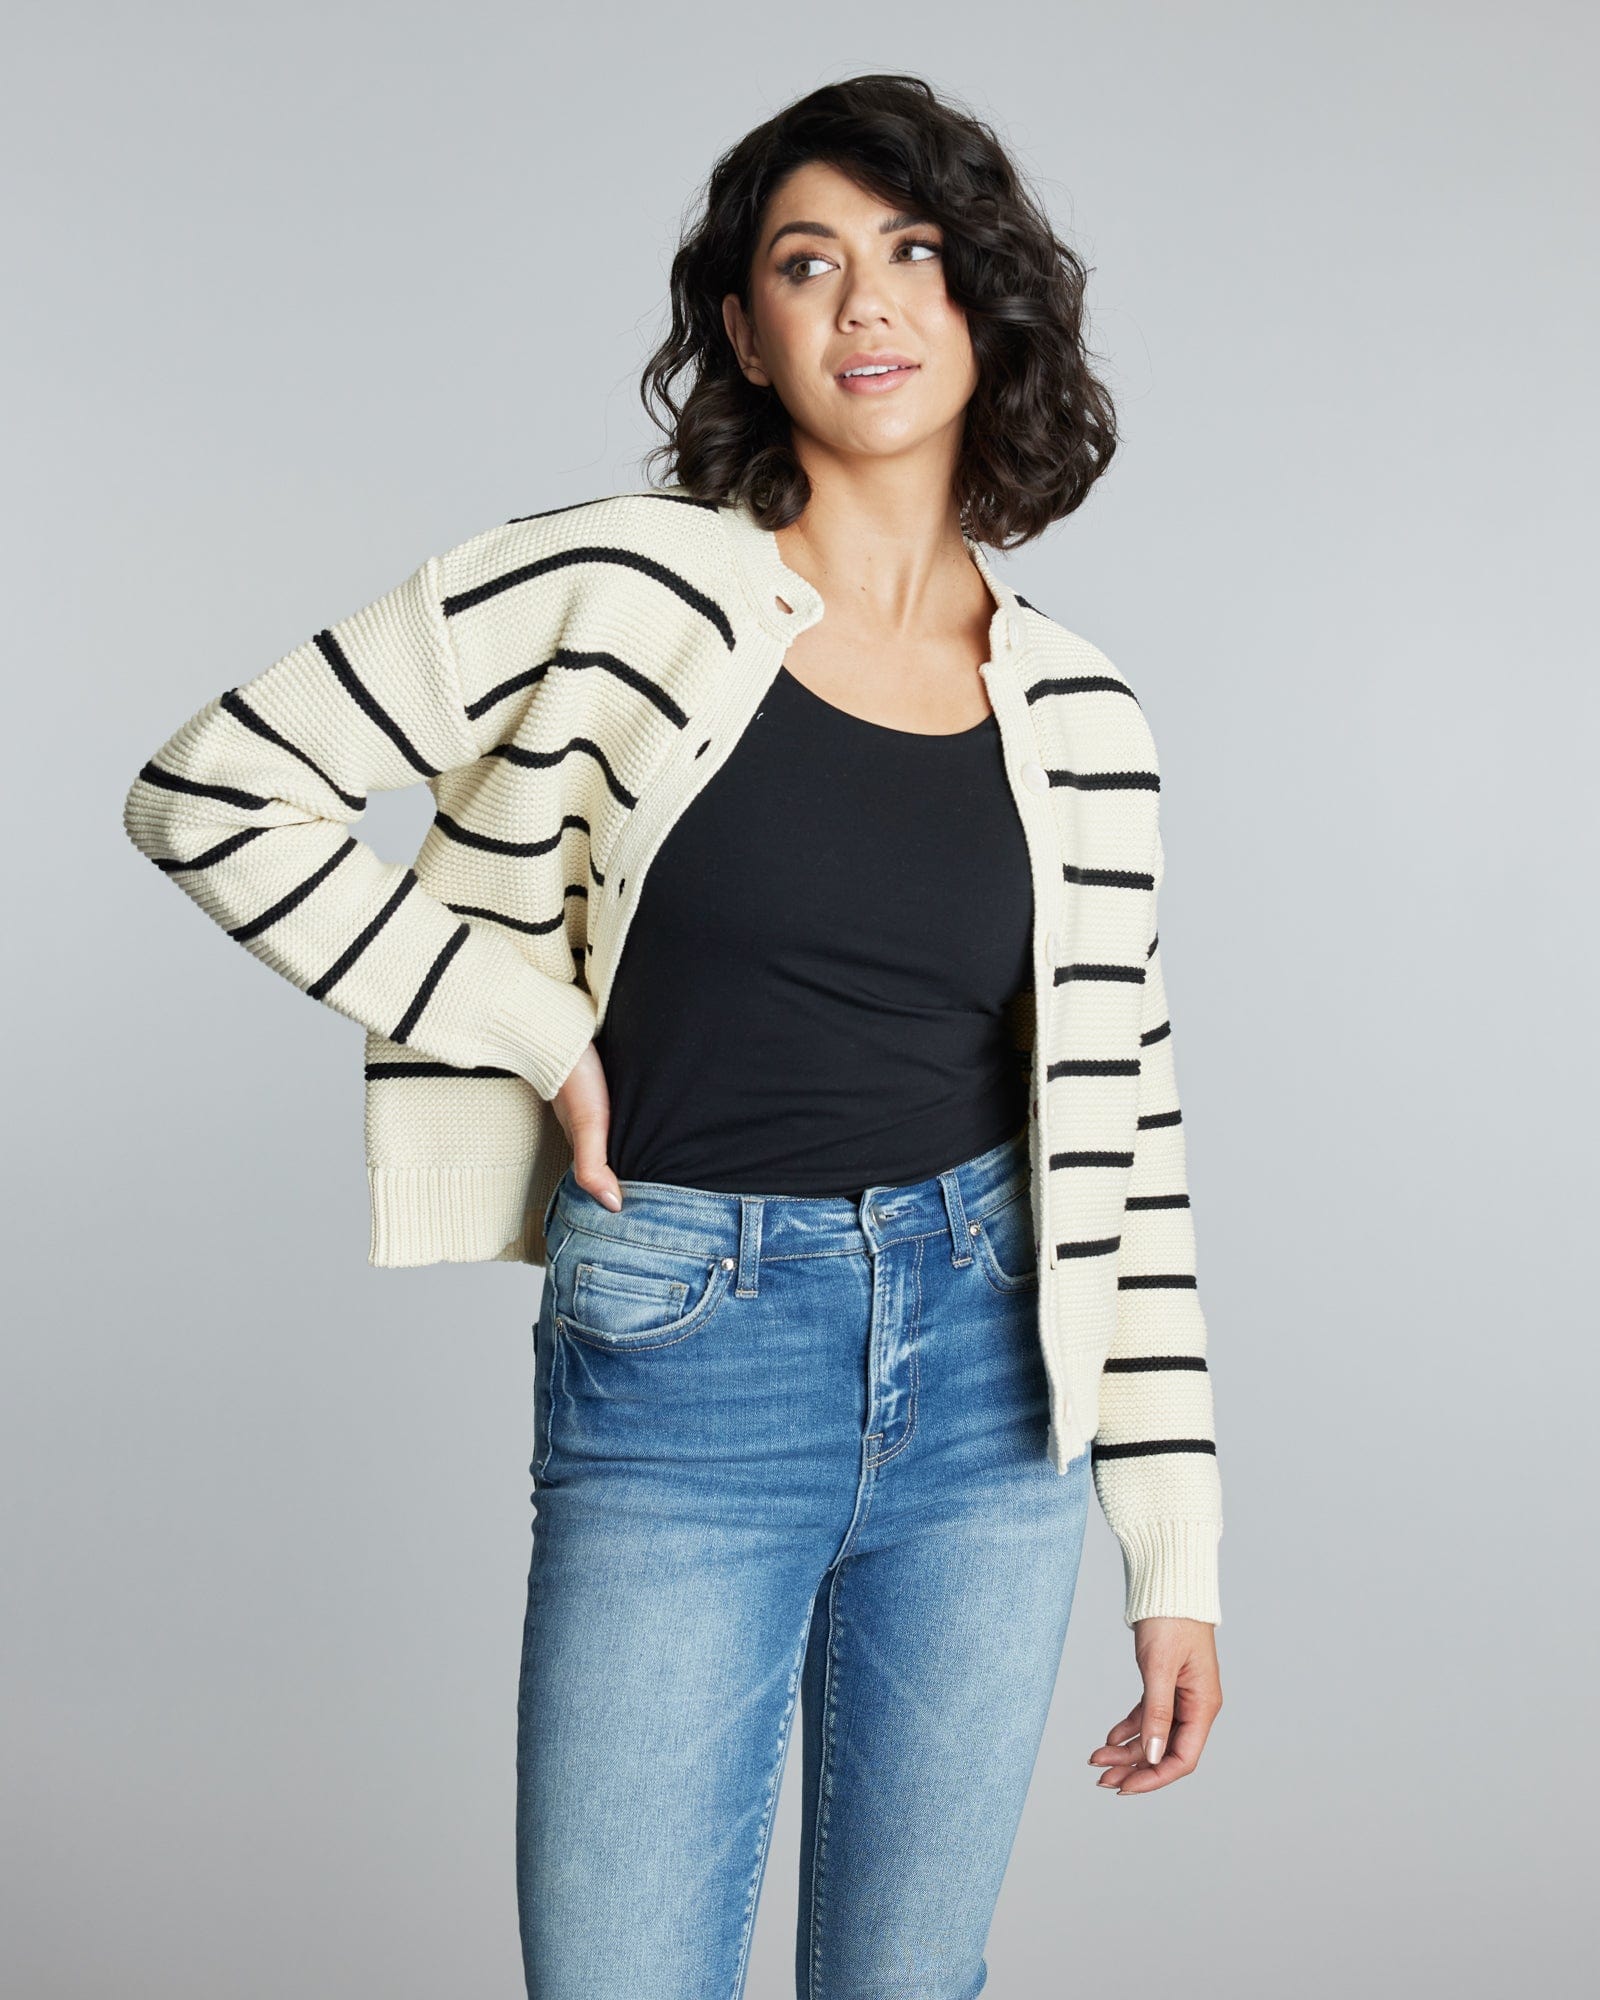 Woman in a long sleeve, black and white striped cardigan